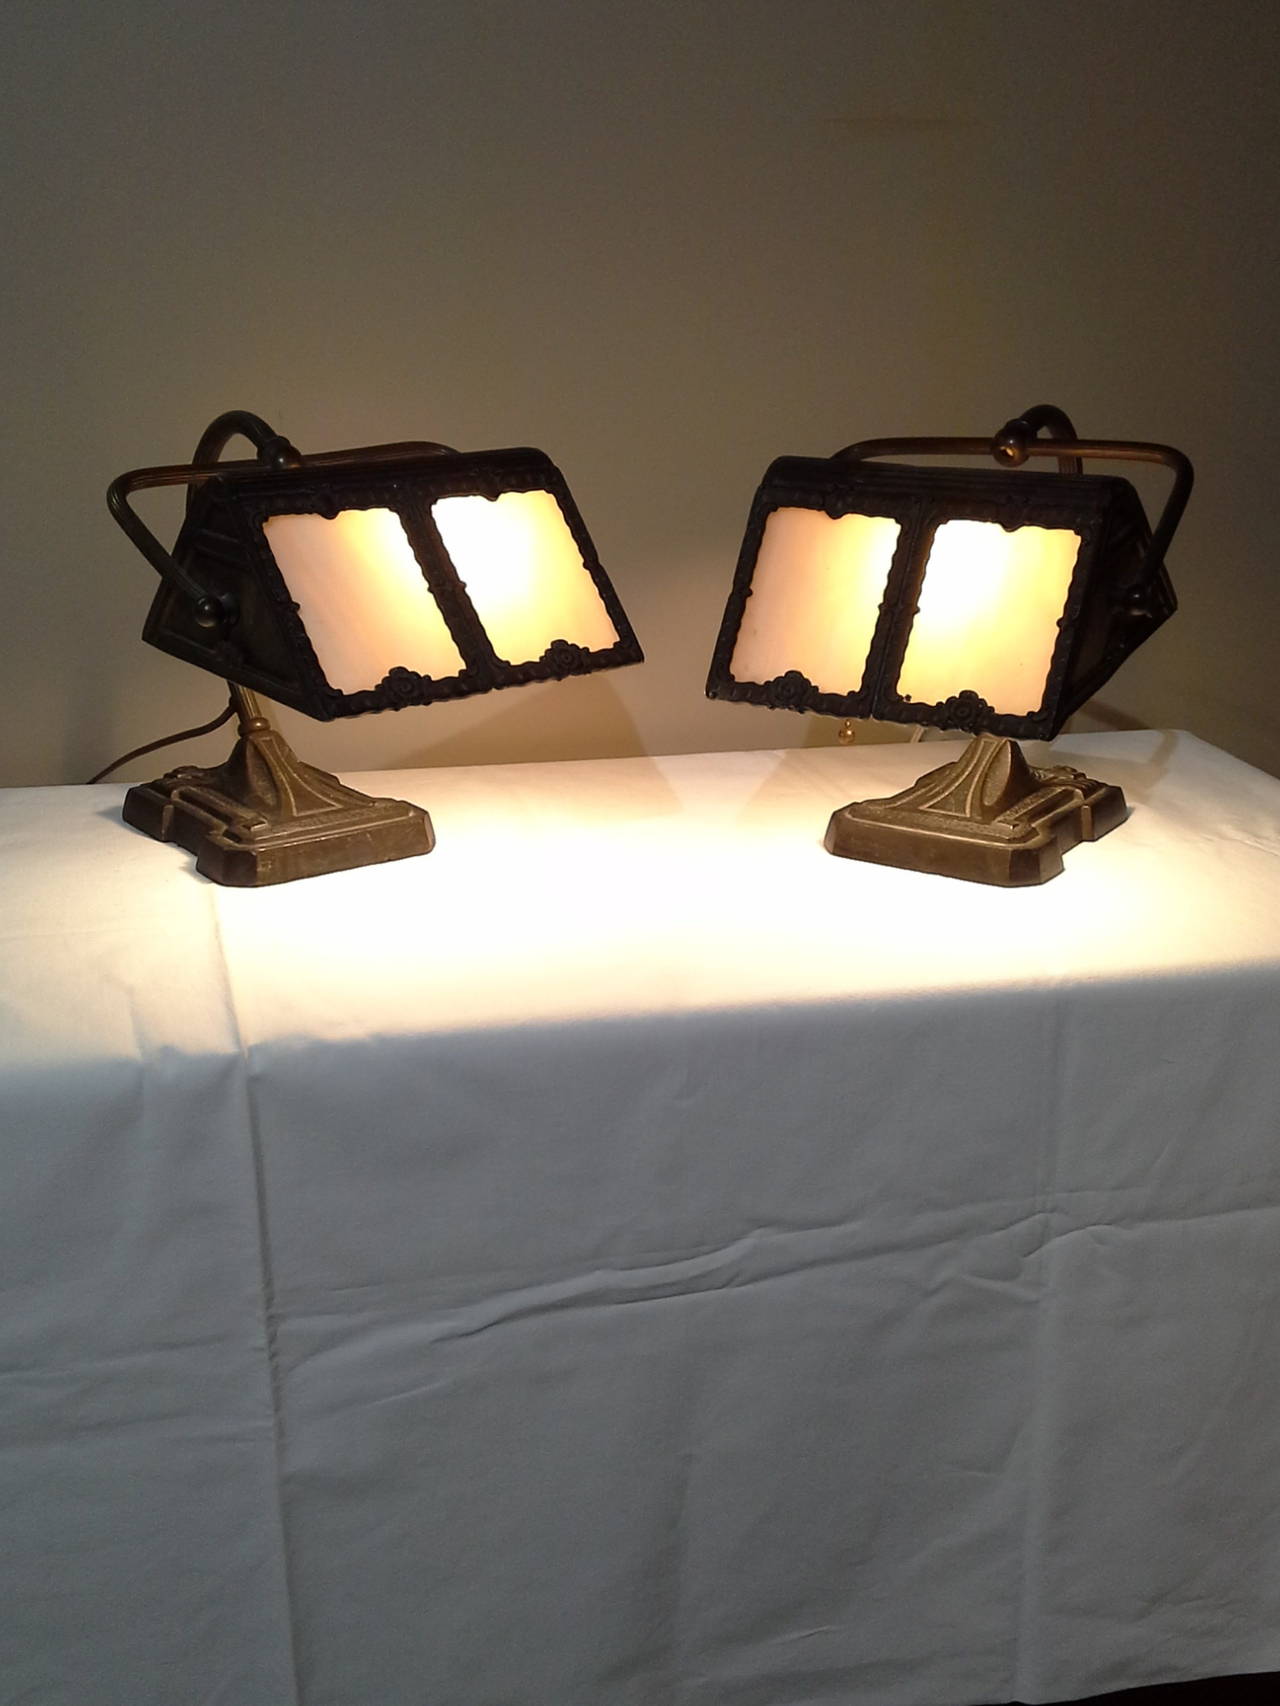 Matched Pair Of Cast Iron Slag Glass Desk Lamps American Circa 1930's, Cast Iron bases with 4 panel in each lamp, Curved back arms, with scrolled decoration and decorative pattern. The lamps measure 9"-inches high x 9"-inches wide x